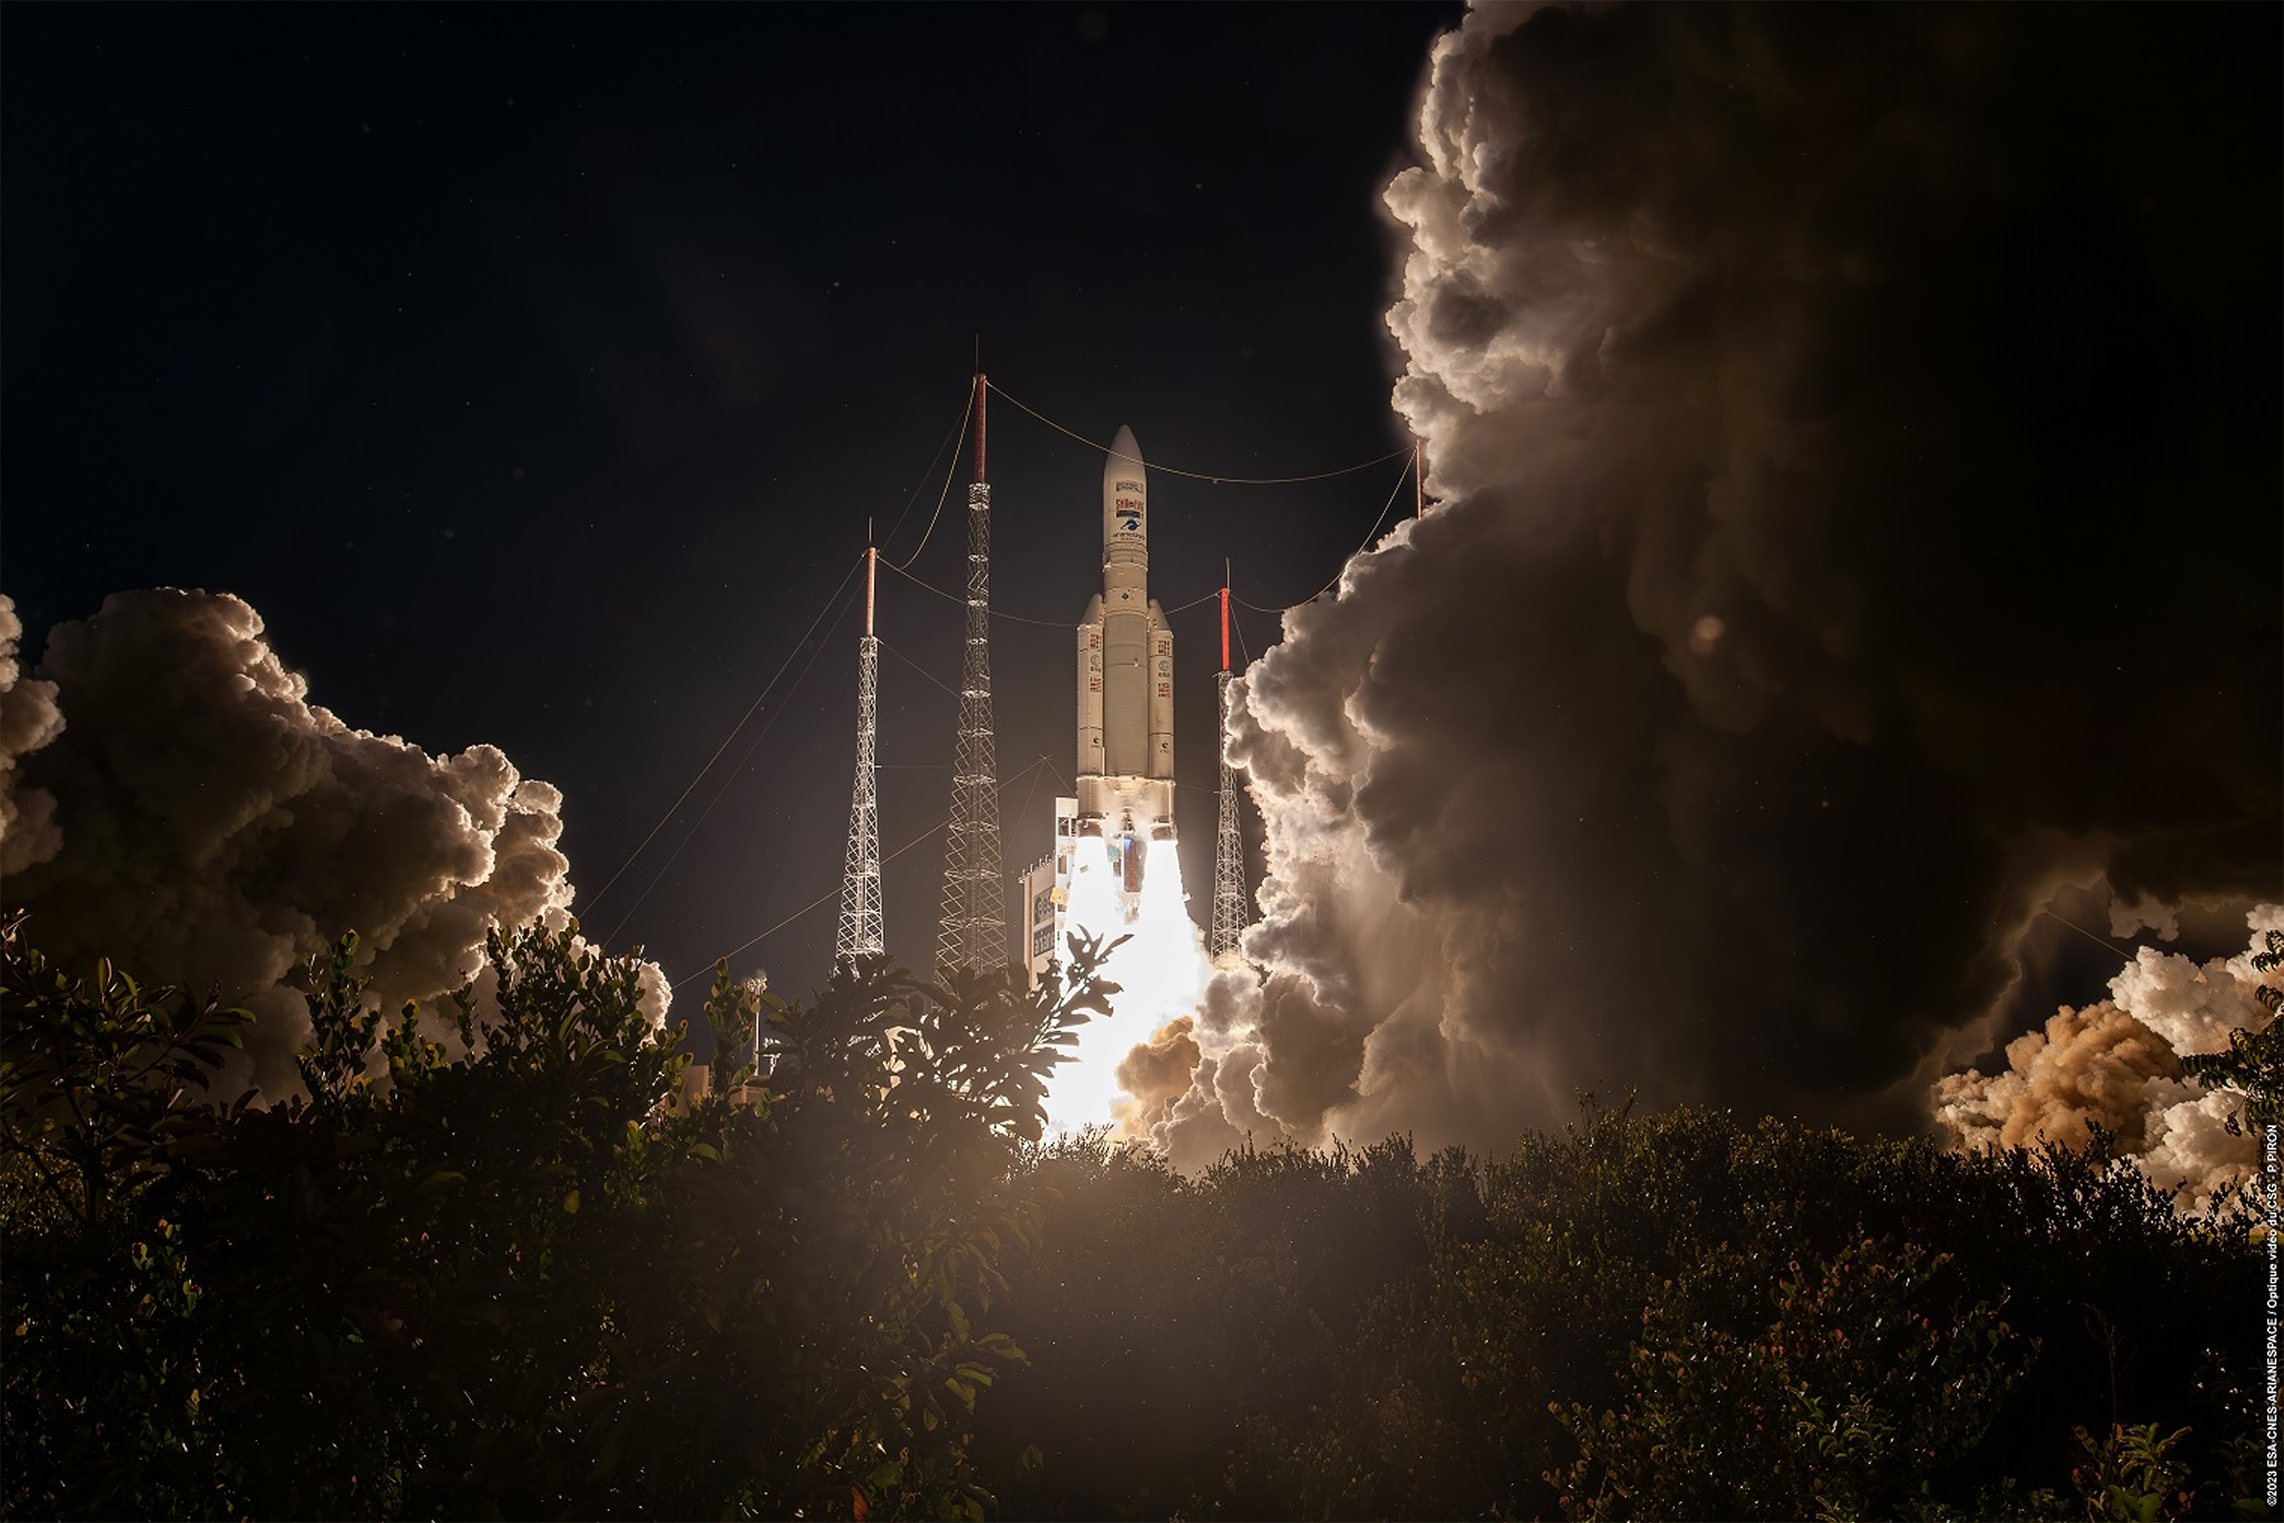 Last mission of the Ariane 5